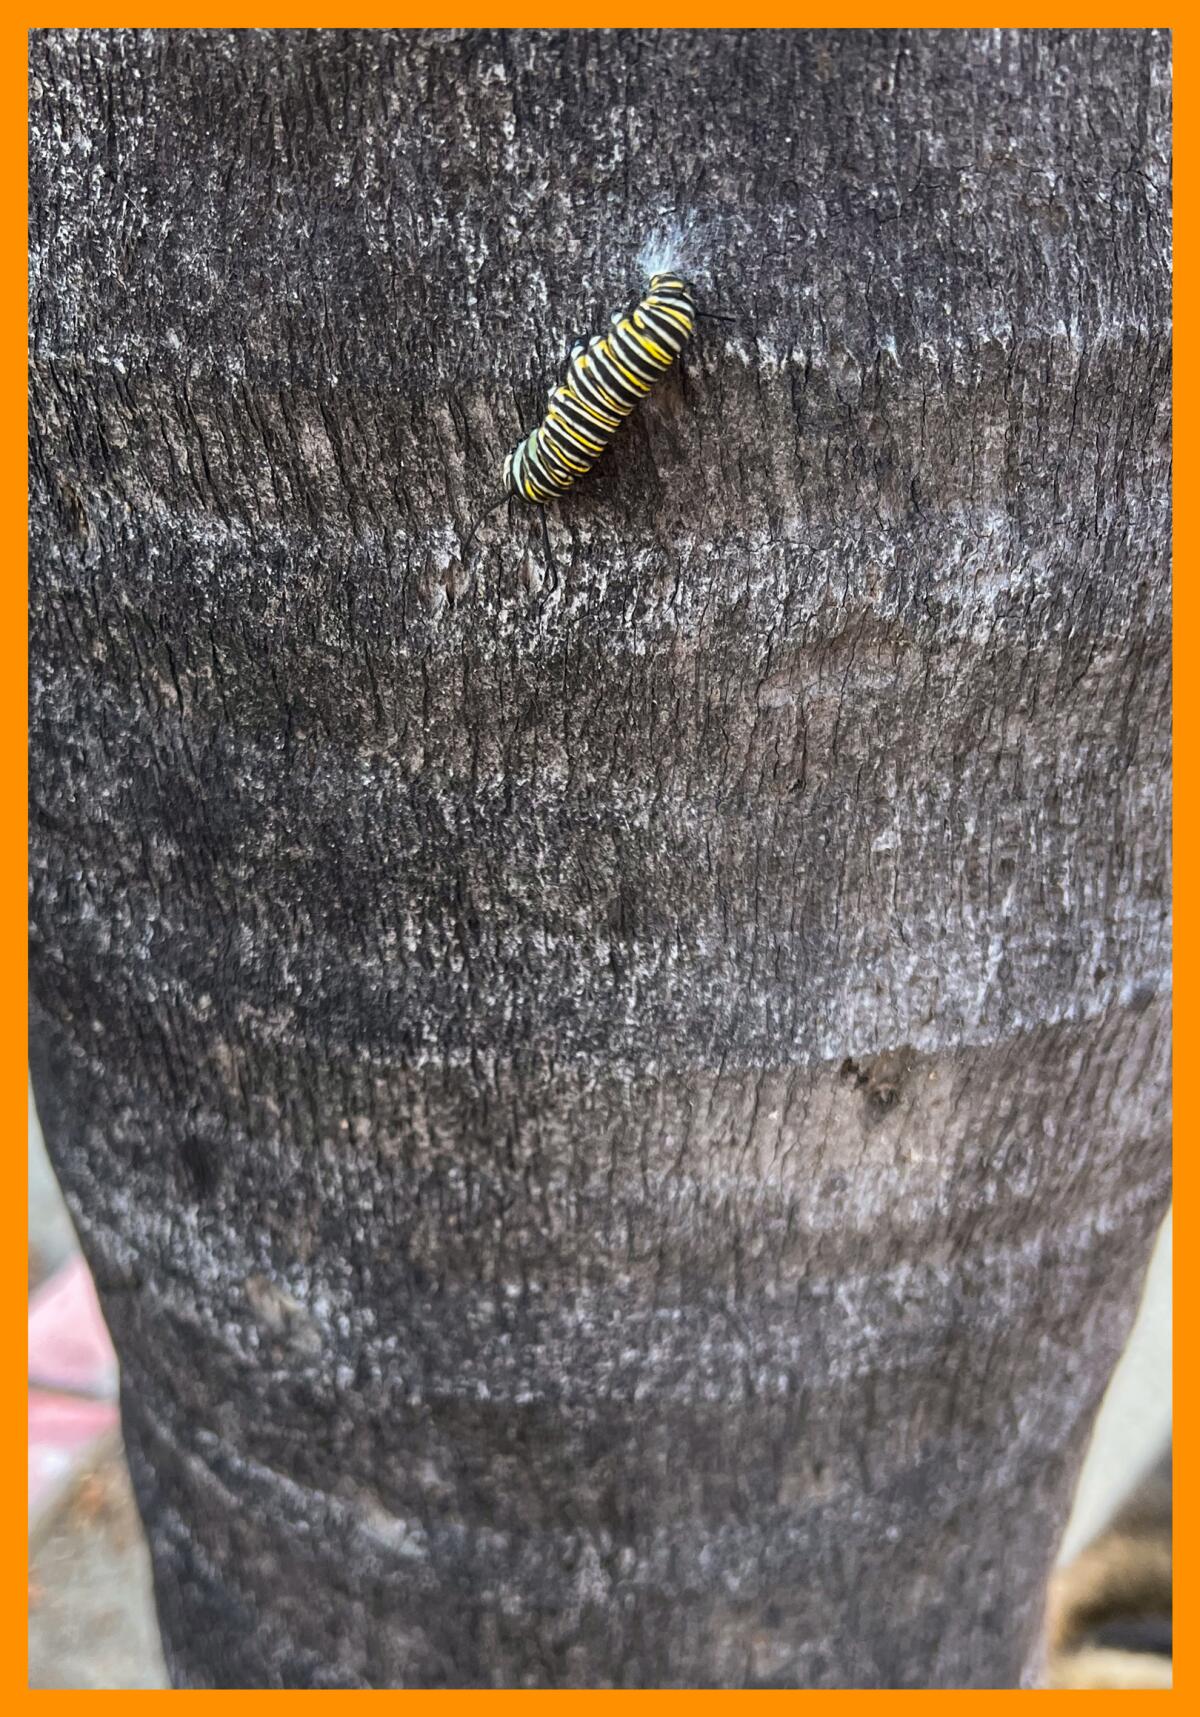 A monarch butterfly caterpillar on the trunk of a palm tree